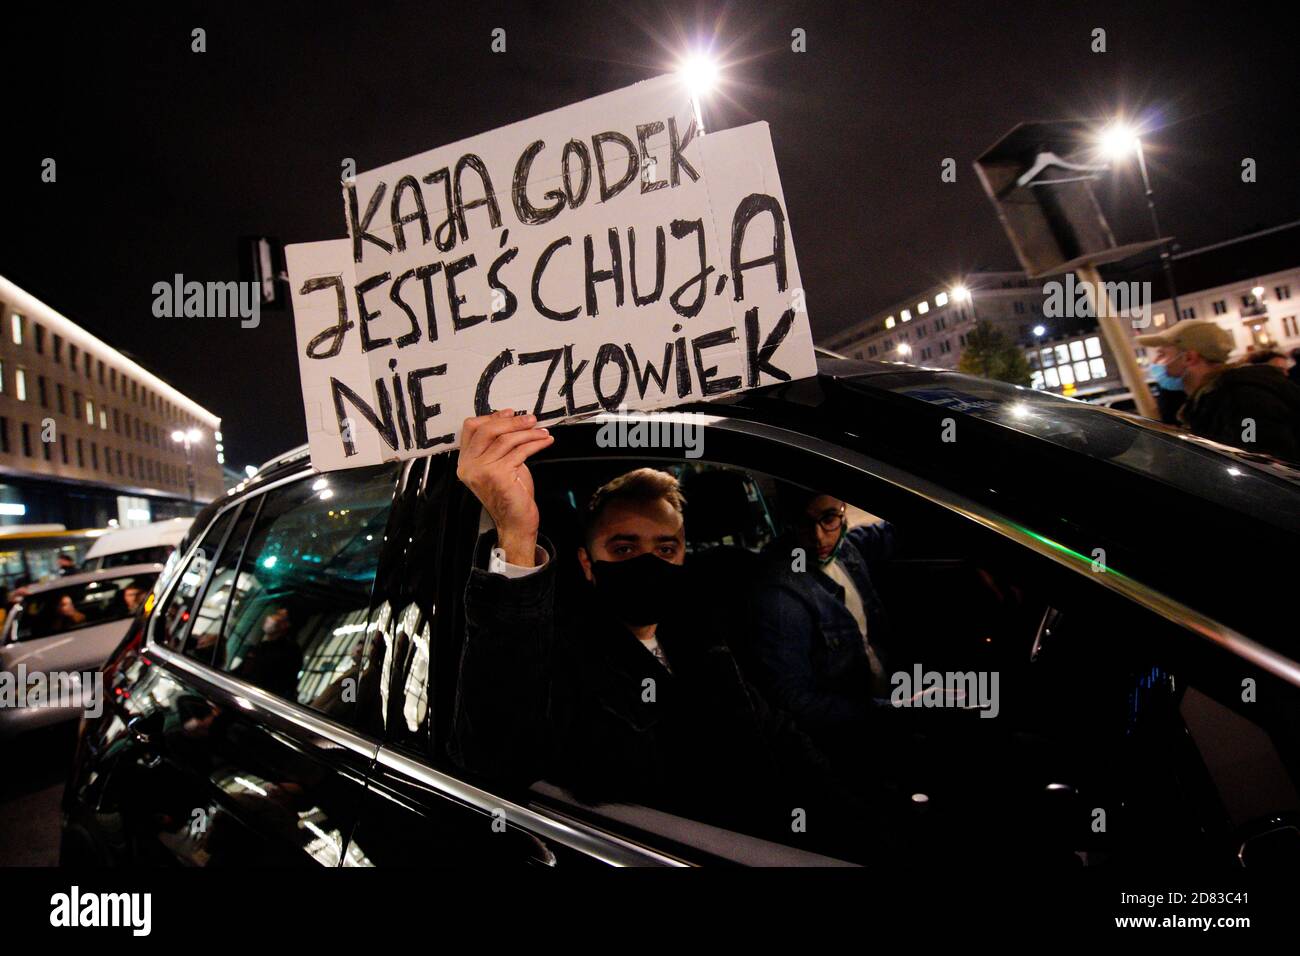 A man holds a sign with insults towards pro-life activist Kaja Godek in  Warsaw, Poland on October 26, 2020. On Monday for the fifth day in a row  pro-c Stock Photo -